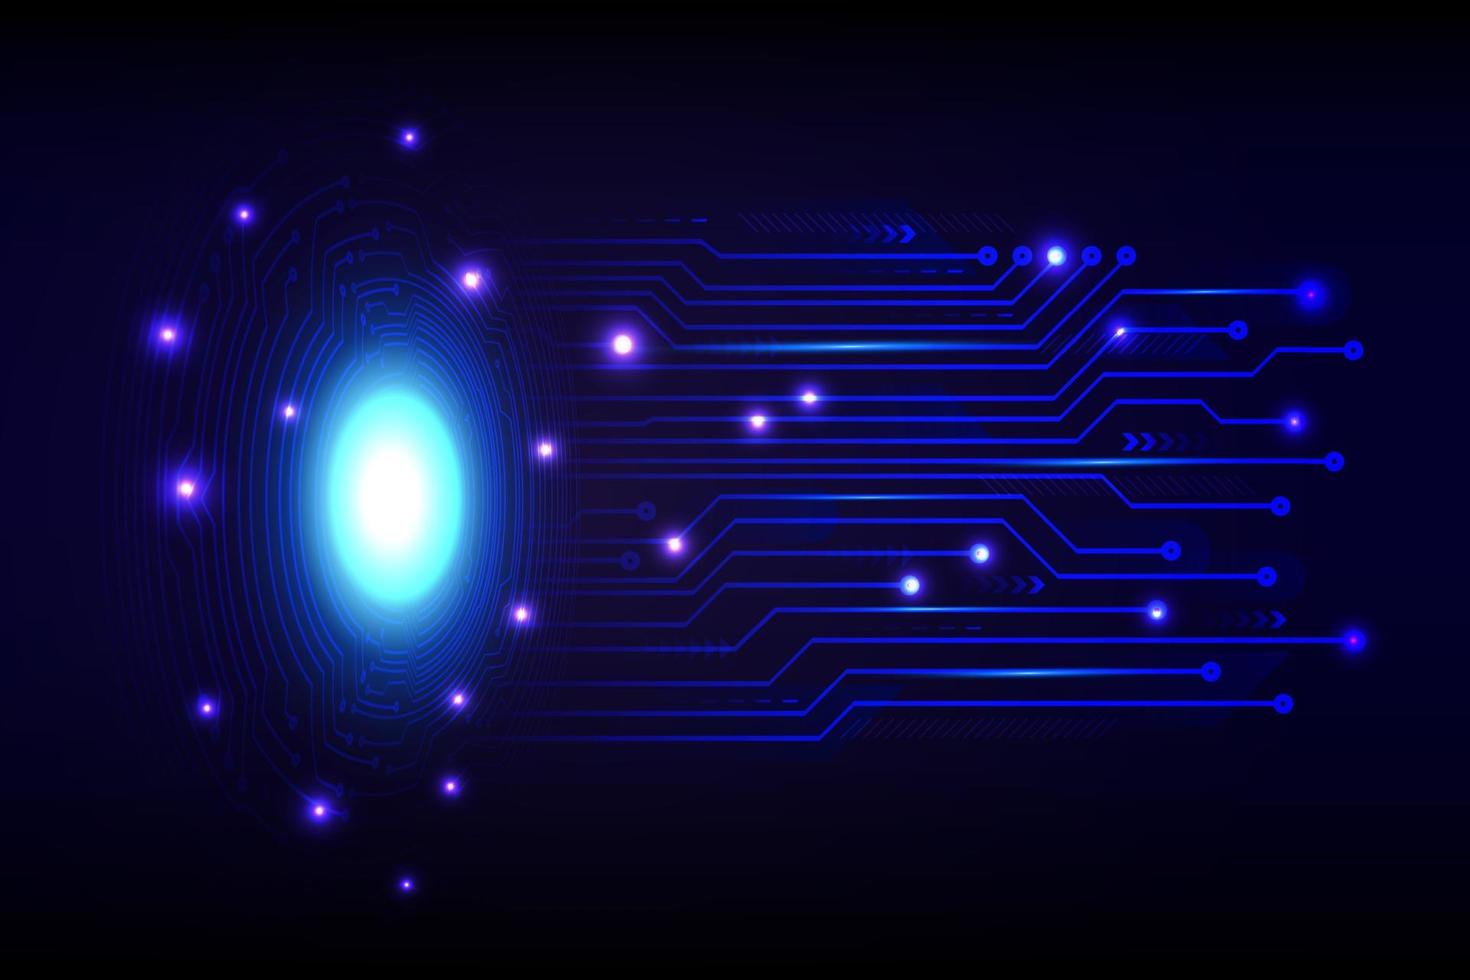 Blue eye cyber circuit future technology concept background vector